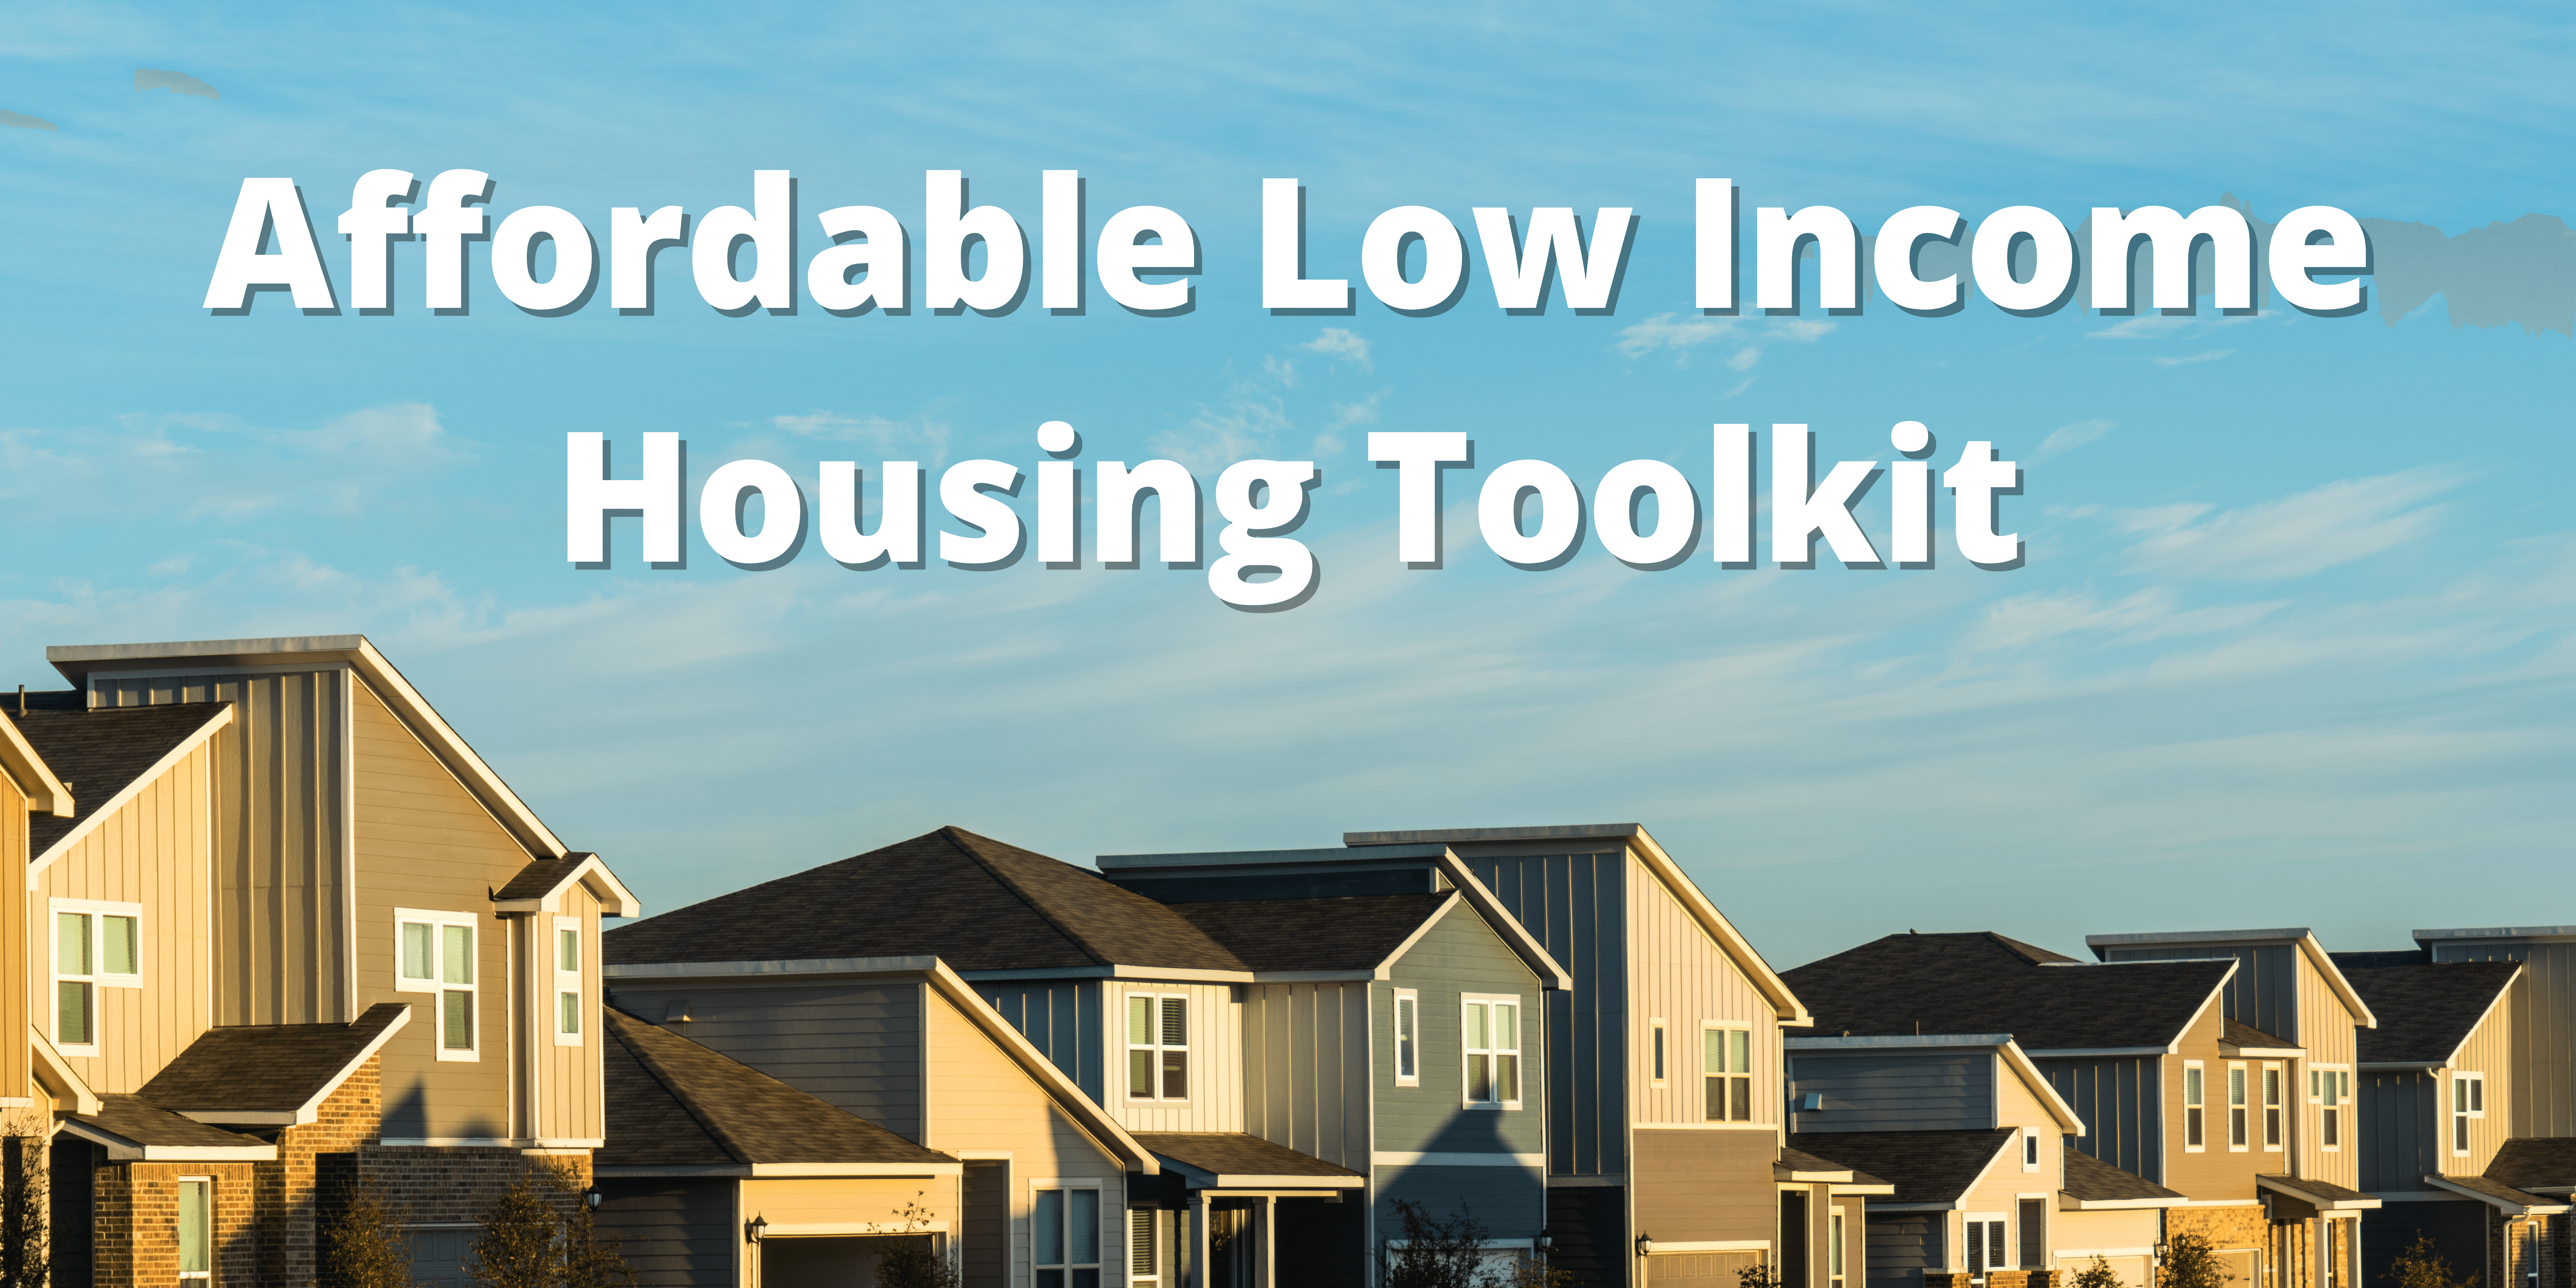 Affordable Low Income Housing Toolkit